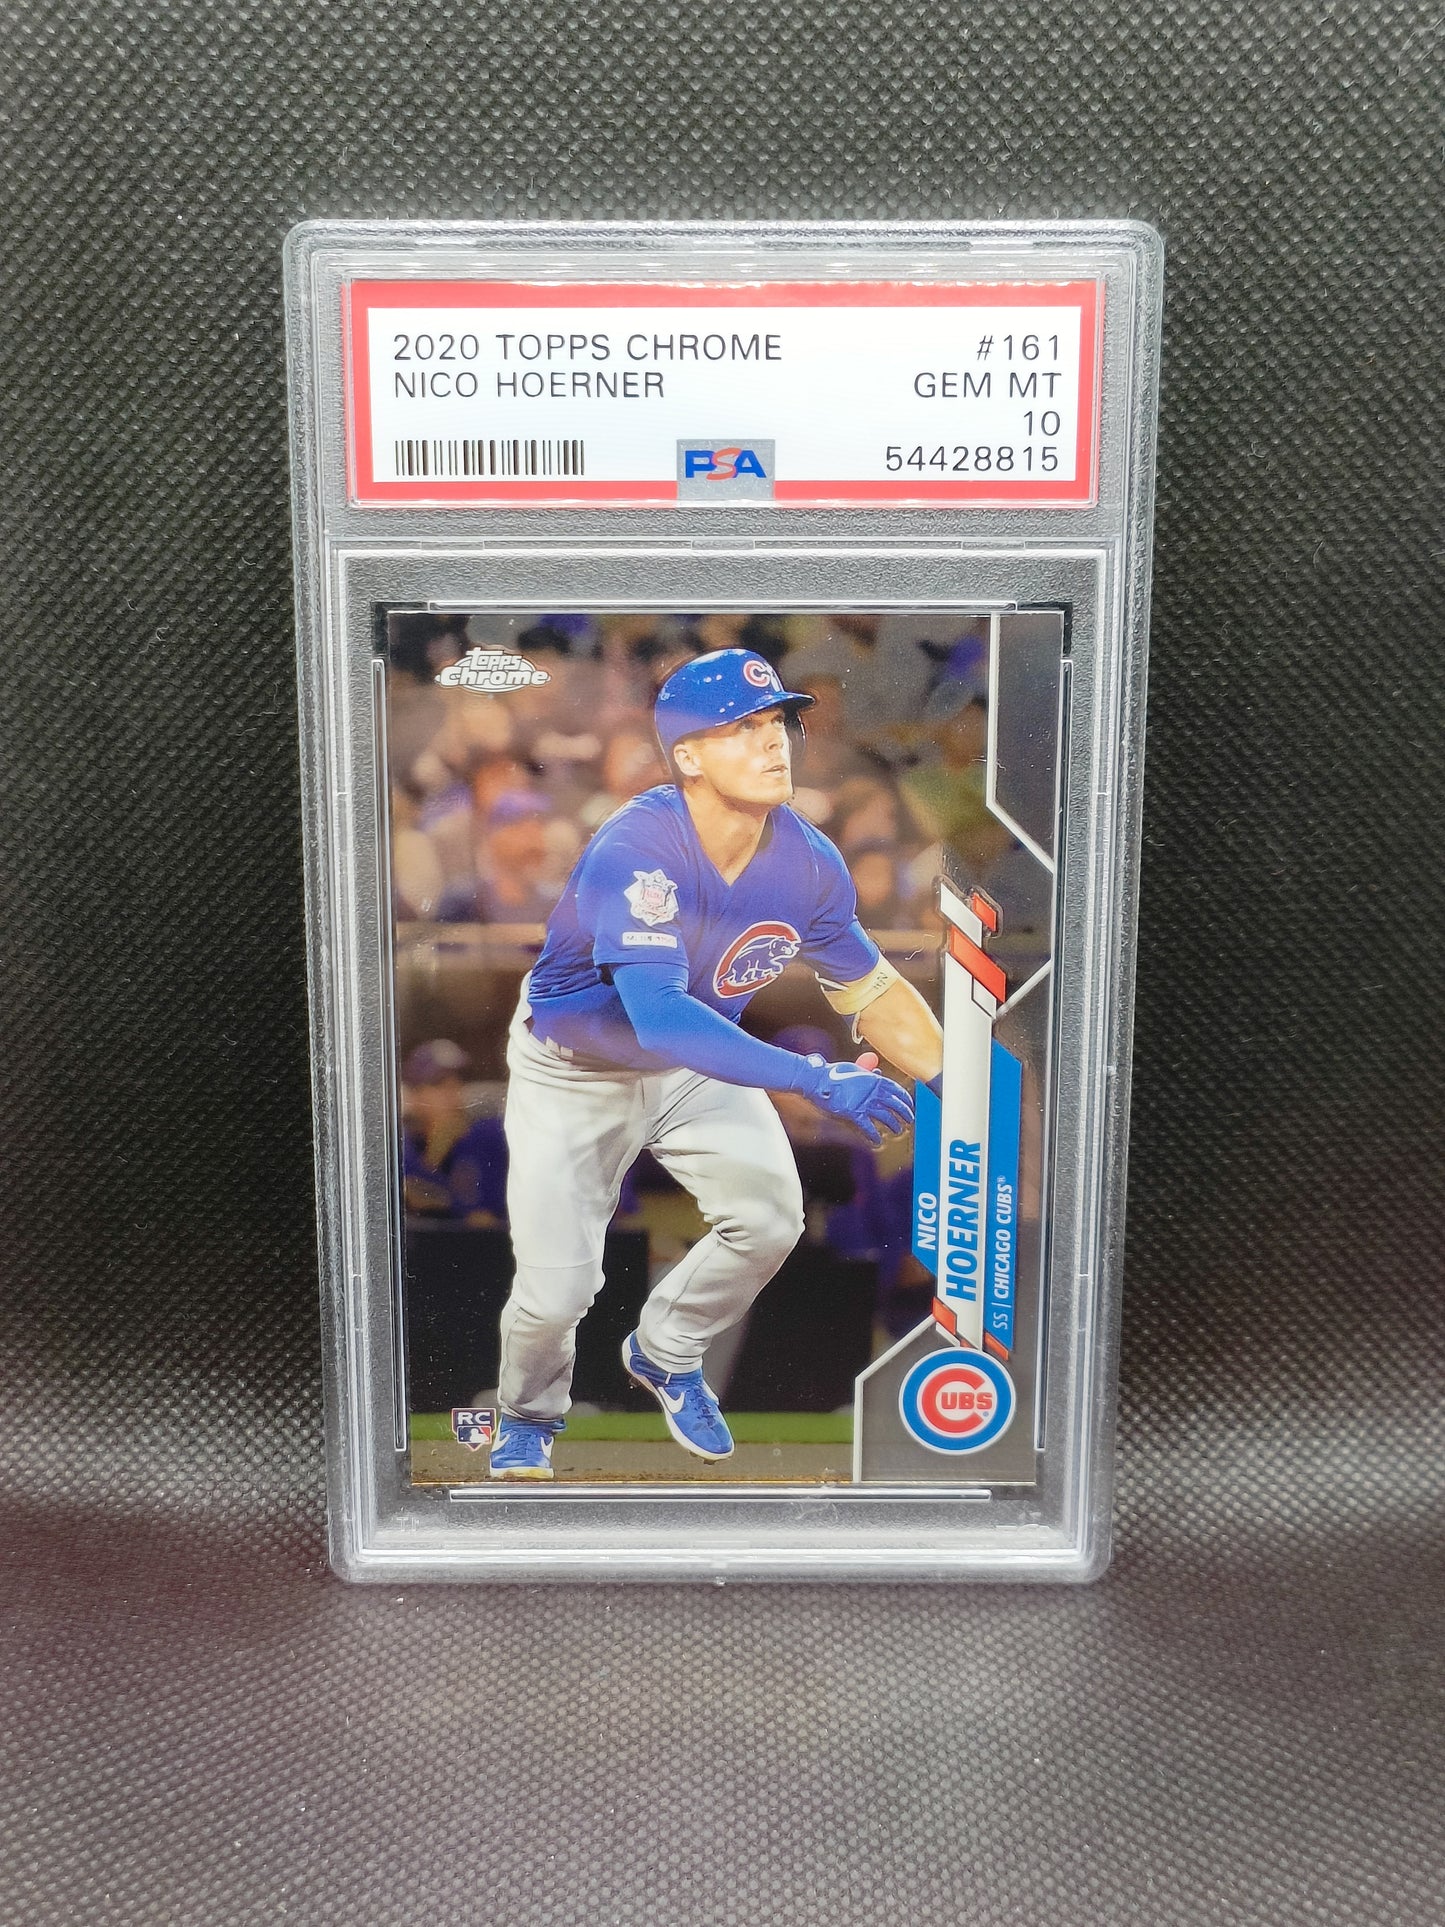 Nico Hoerner - 2020 Topps Chrome Rookie - PSA 10 - Chicago Cubs